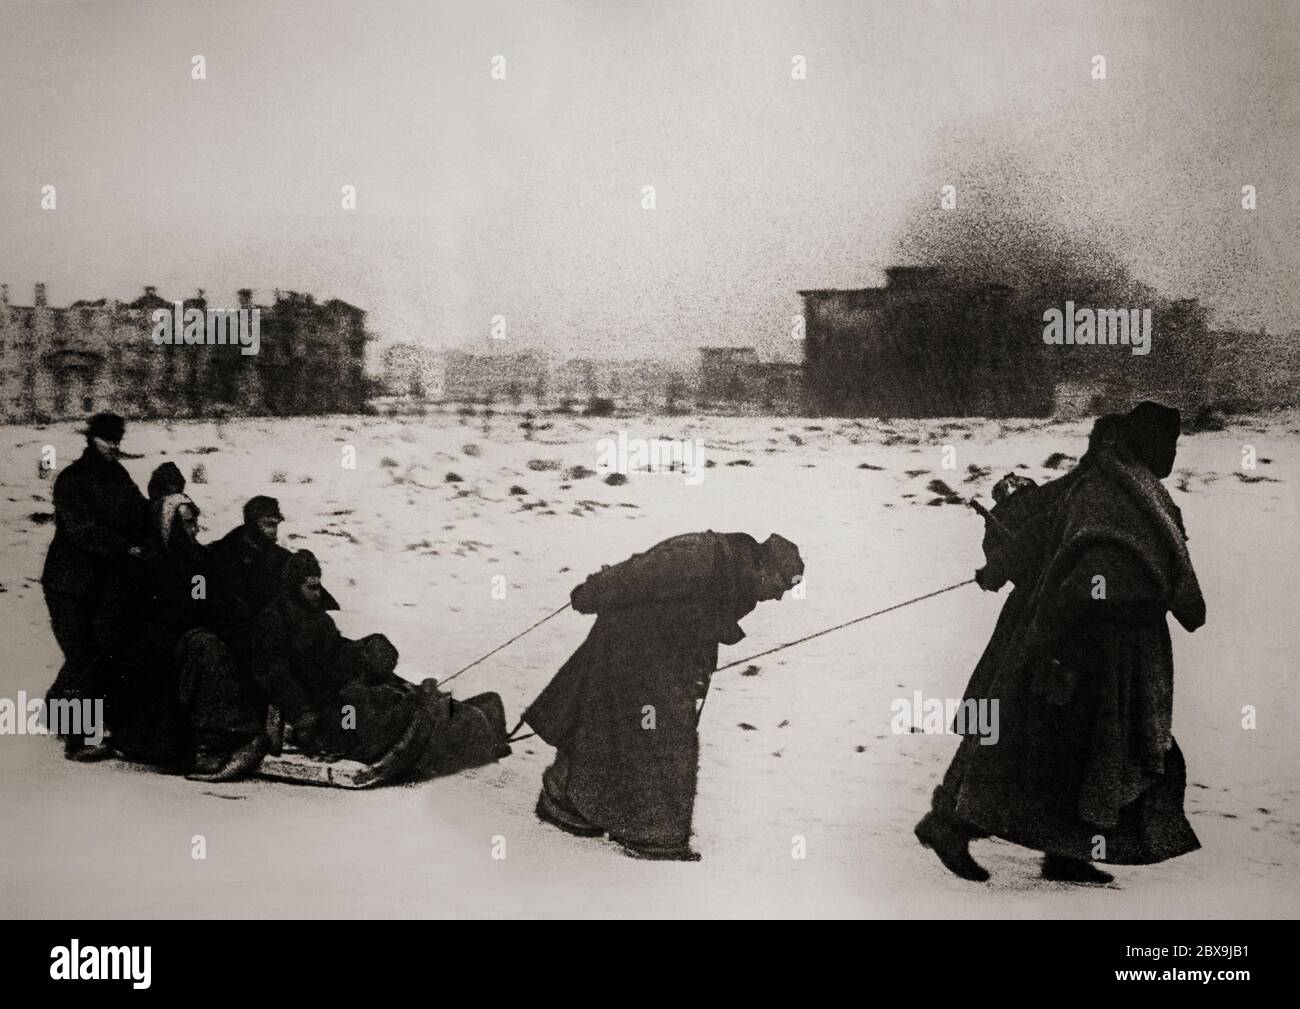 Defeated German soldiers following the defeat of the 6th Army in the Battle of Stalingrad (1942-1943), a battle marked by fierce close-quarters combat and direct assaults on civilians in air raids during one of the bloodiest battles in the history of warfare, with an estimated 2 million total casualties. Stock Photo